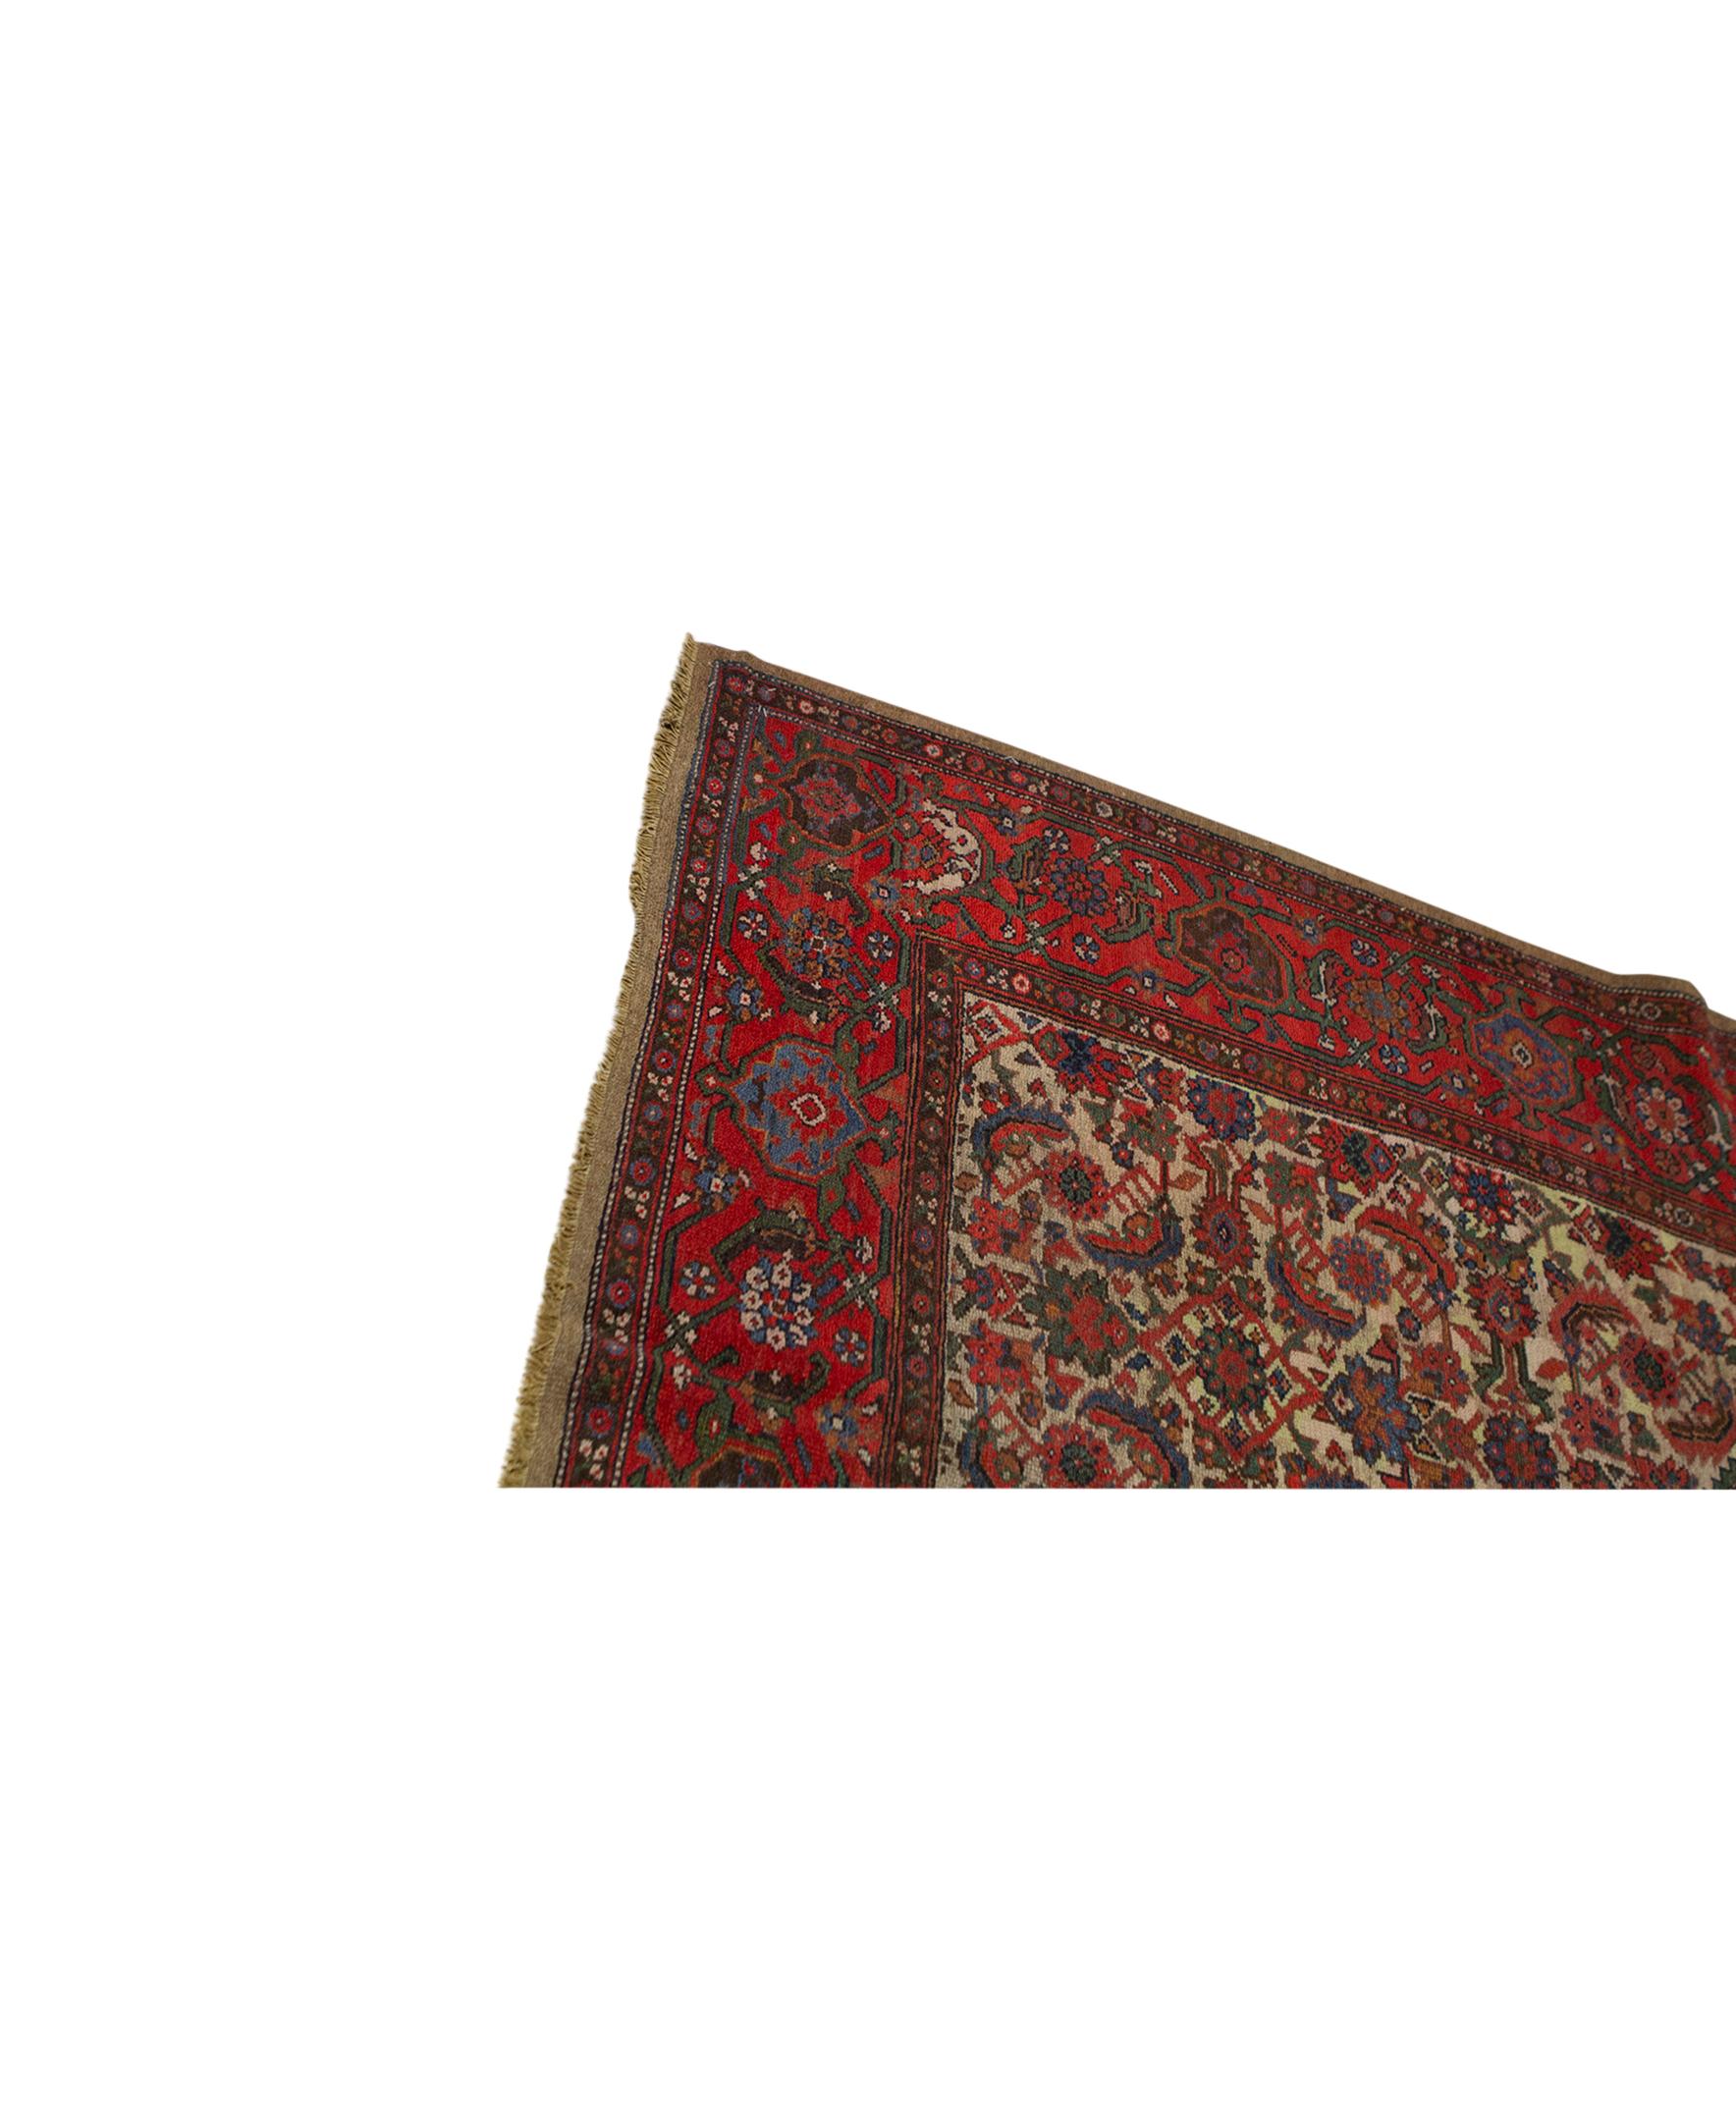   Antique Persian Fine Traditional Handwoven Luxury Wool Rust Rug. Size: 10'-7